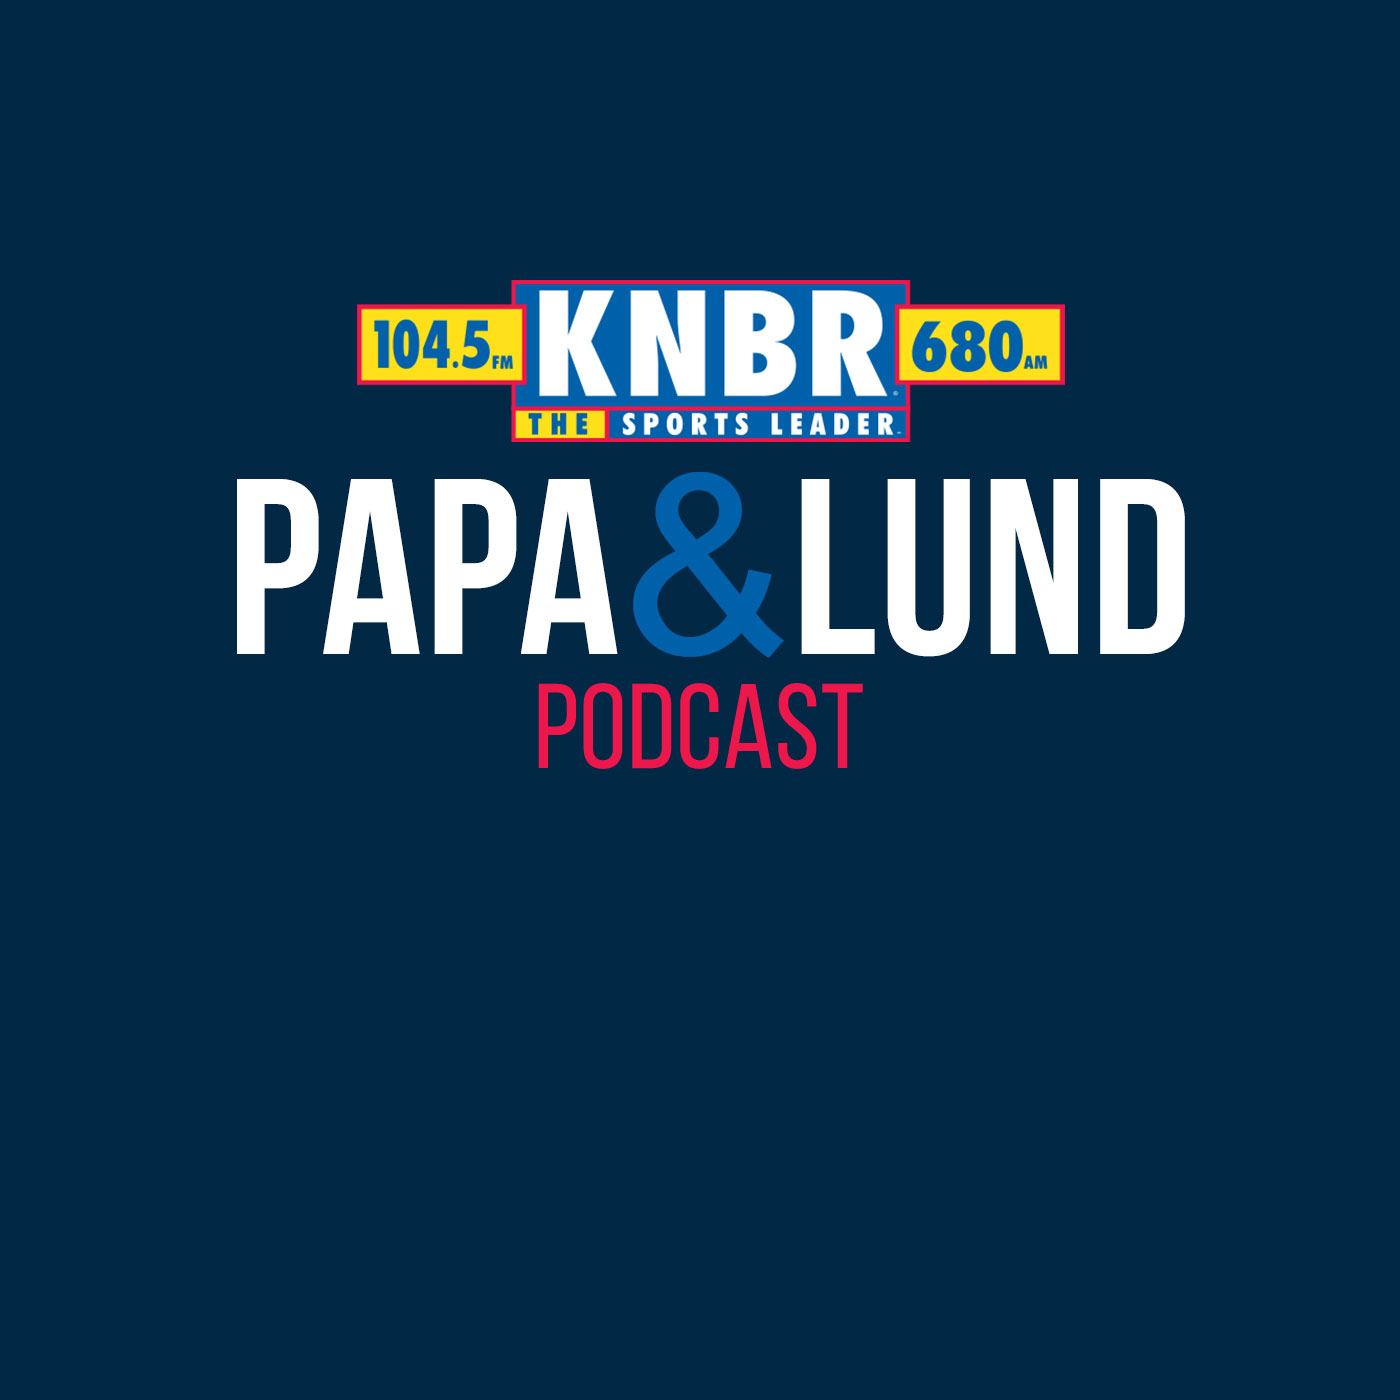 12-4 Mike Pereira joins Papa & Lund to discuss the the situation between Dre Greenlaw and Big Dom on the Eagles sideline that ultimately lead to Greenlaw being ejected